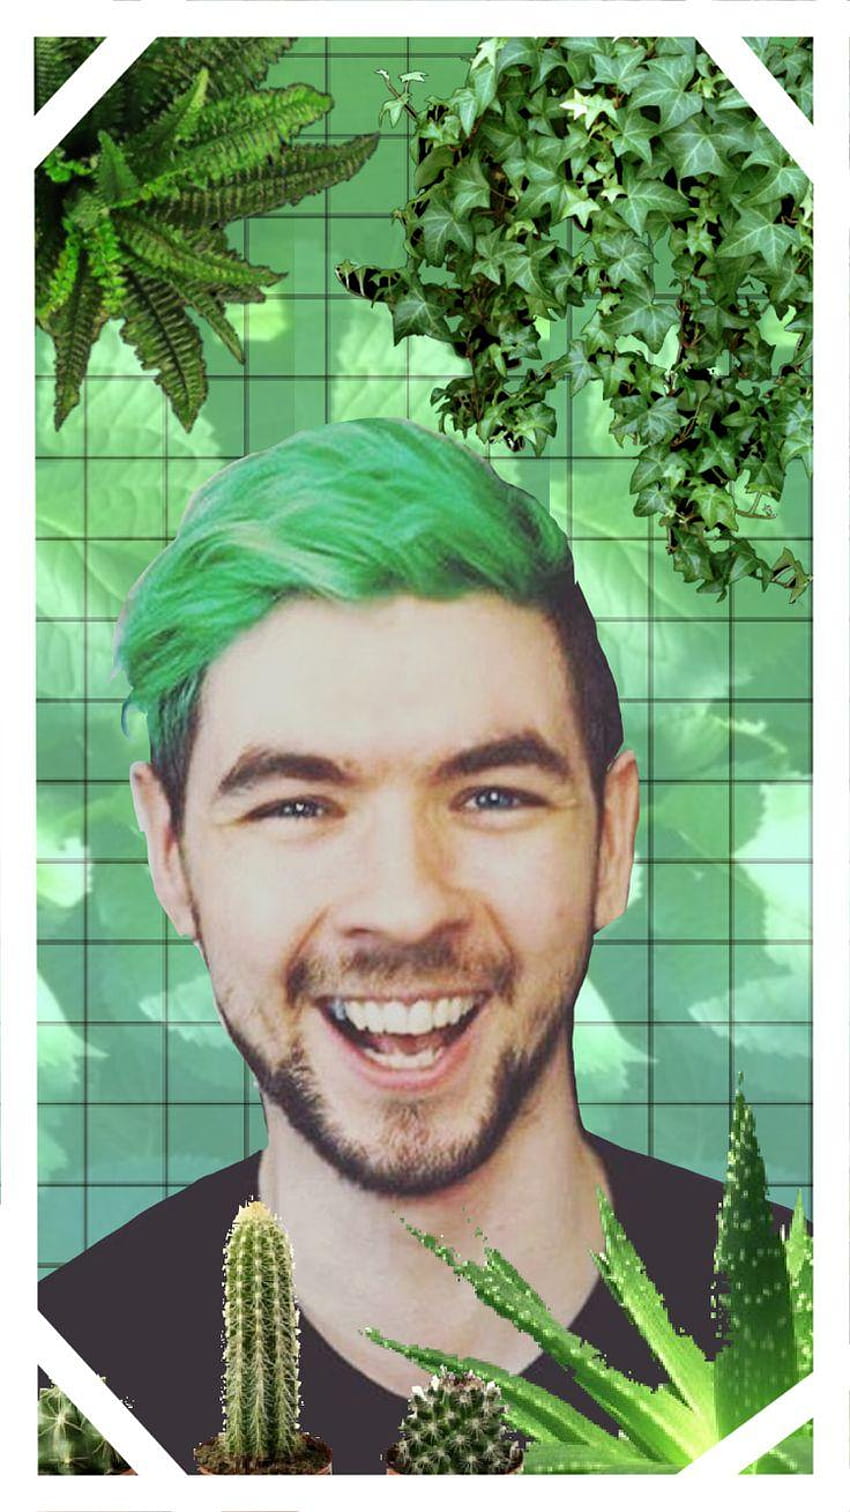 Collage of a smiling man with green hair and plants. - Markiplier